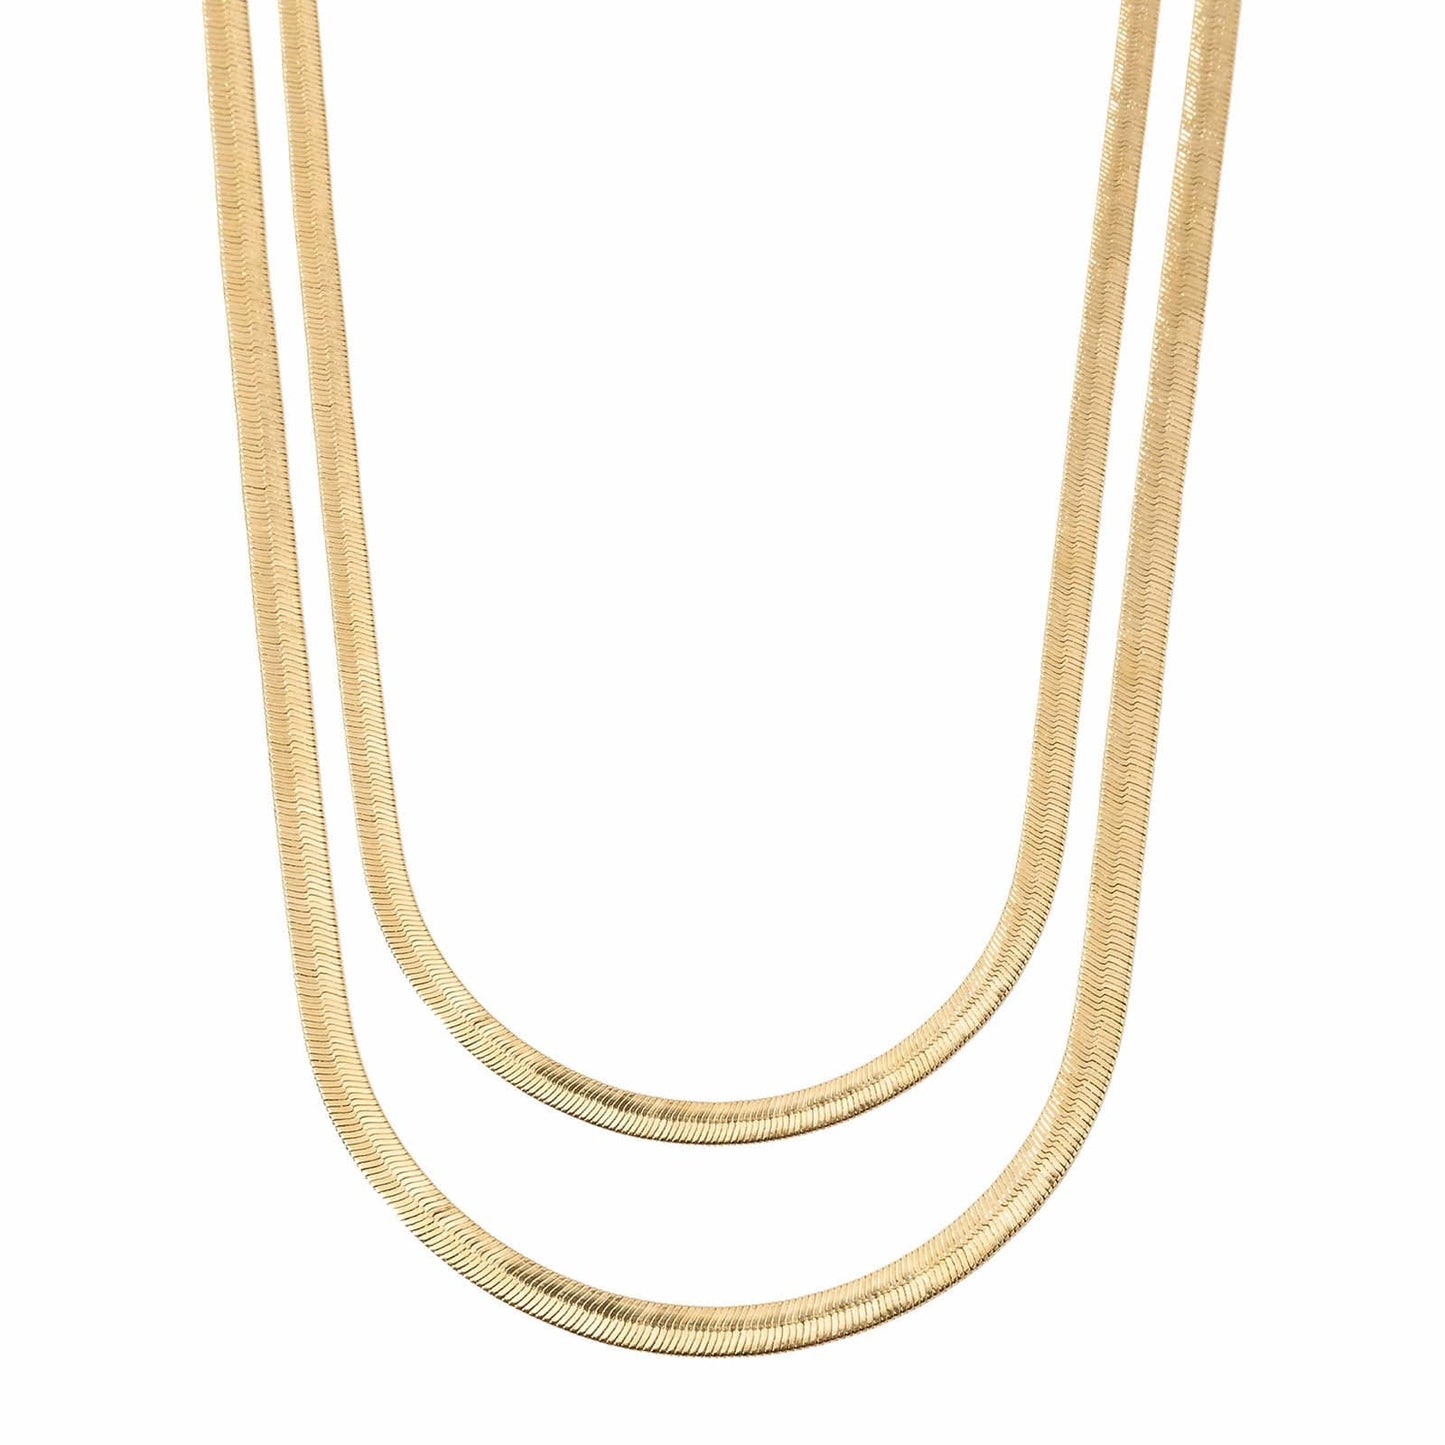 Sterling Silver Flat Snake Chain Couple Necklaces Set In 14K Gold Plated